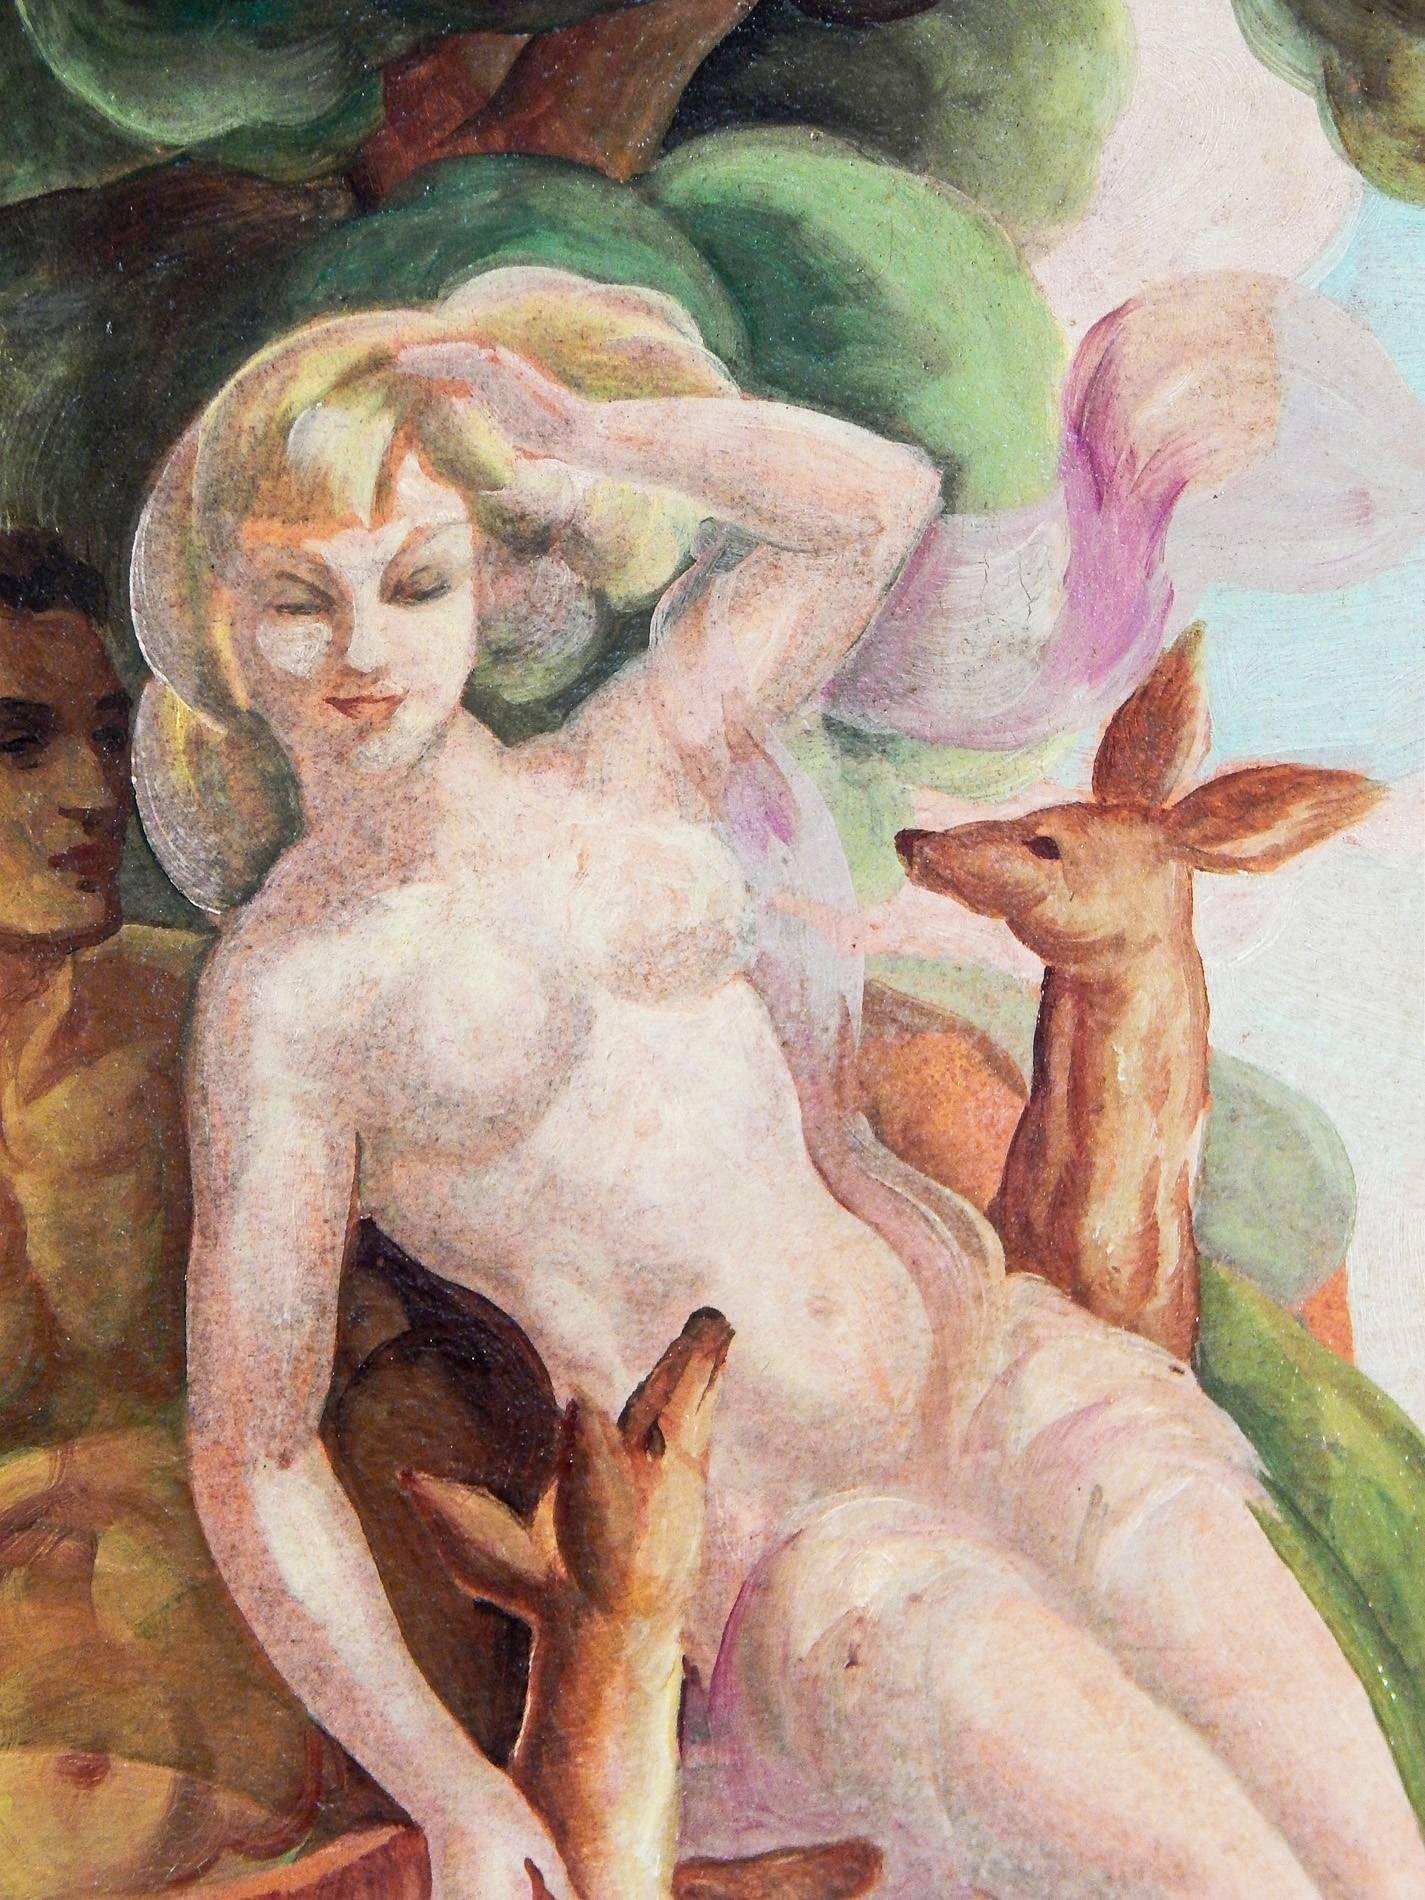 This superb and Classic example of Art Deco painting -- with a nude male and female couple attended by two deer at the edge of the sea -- was painted by George Lepape, an important illustrator and painter who was closely associated with the French